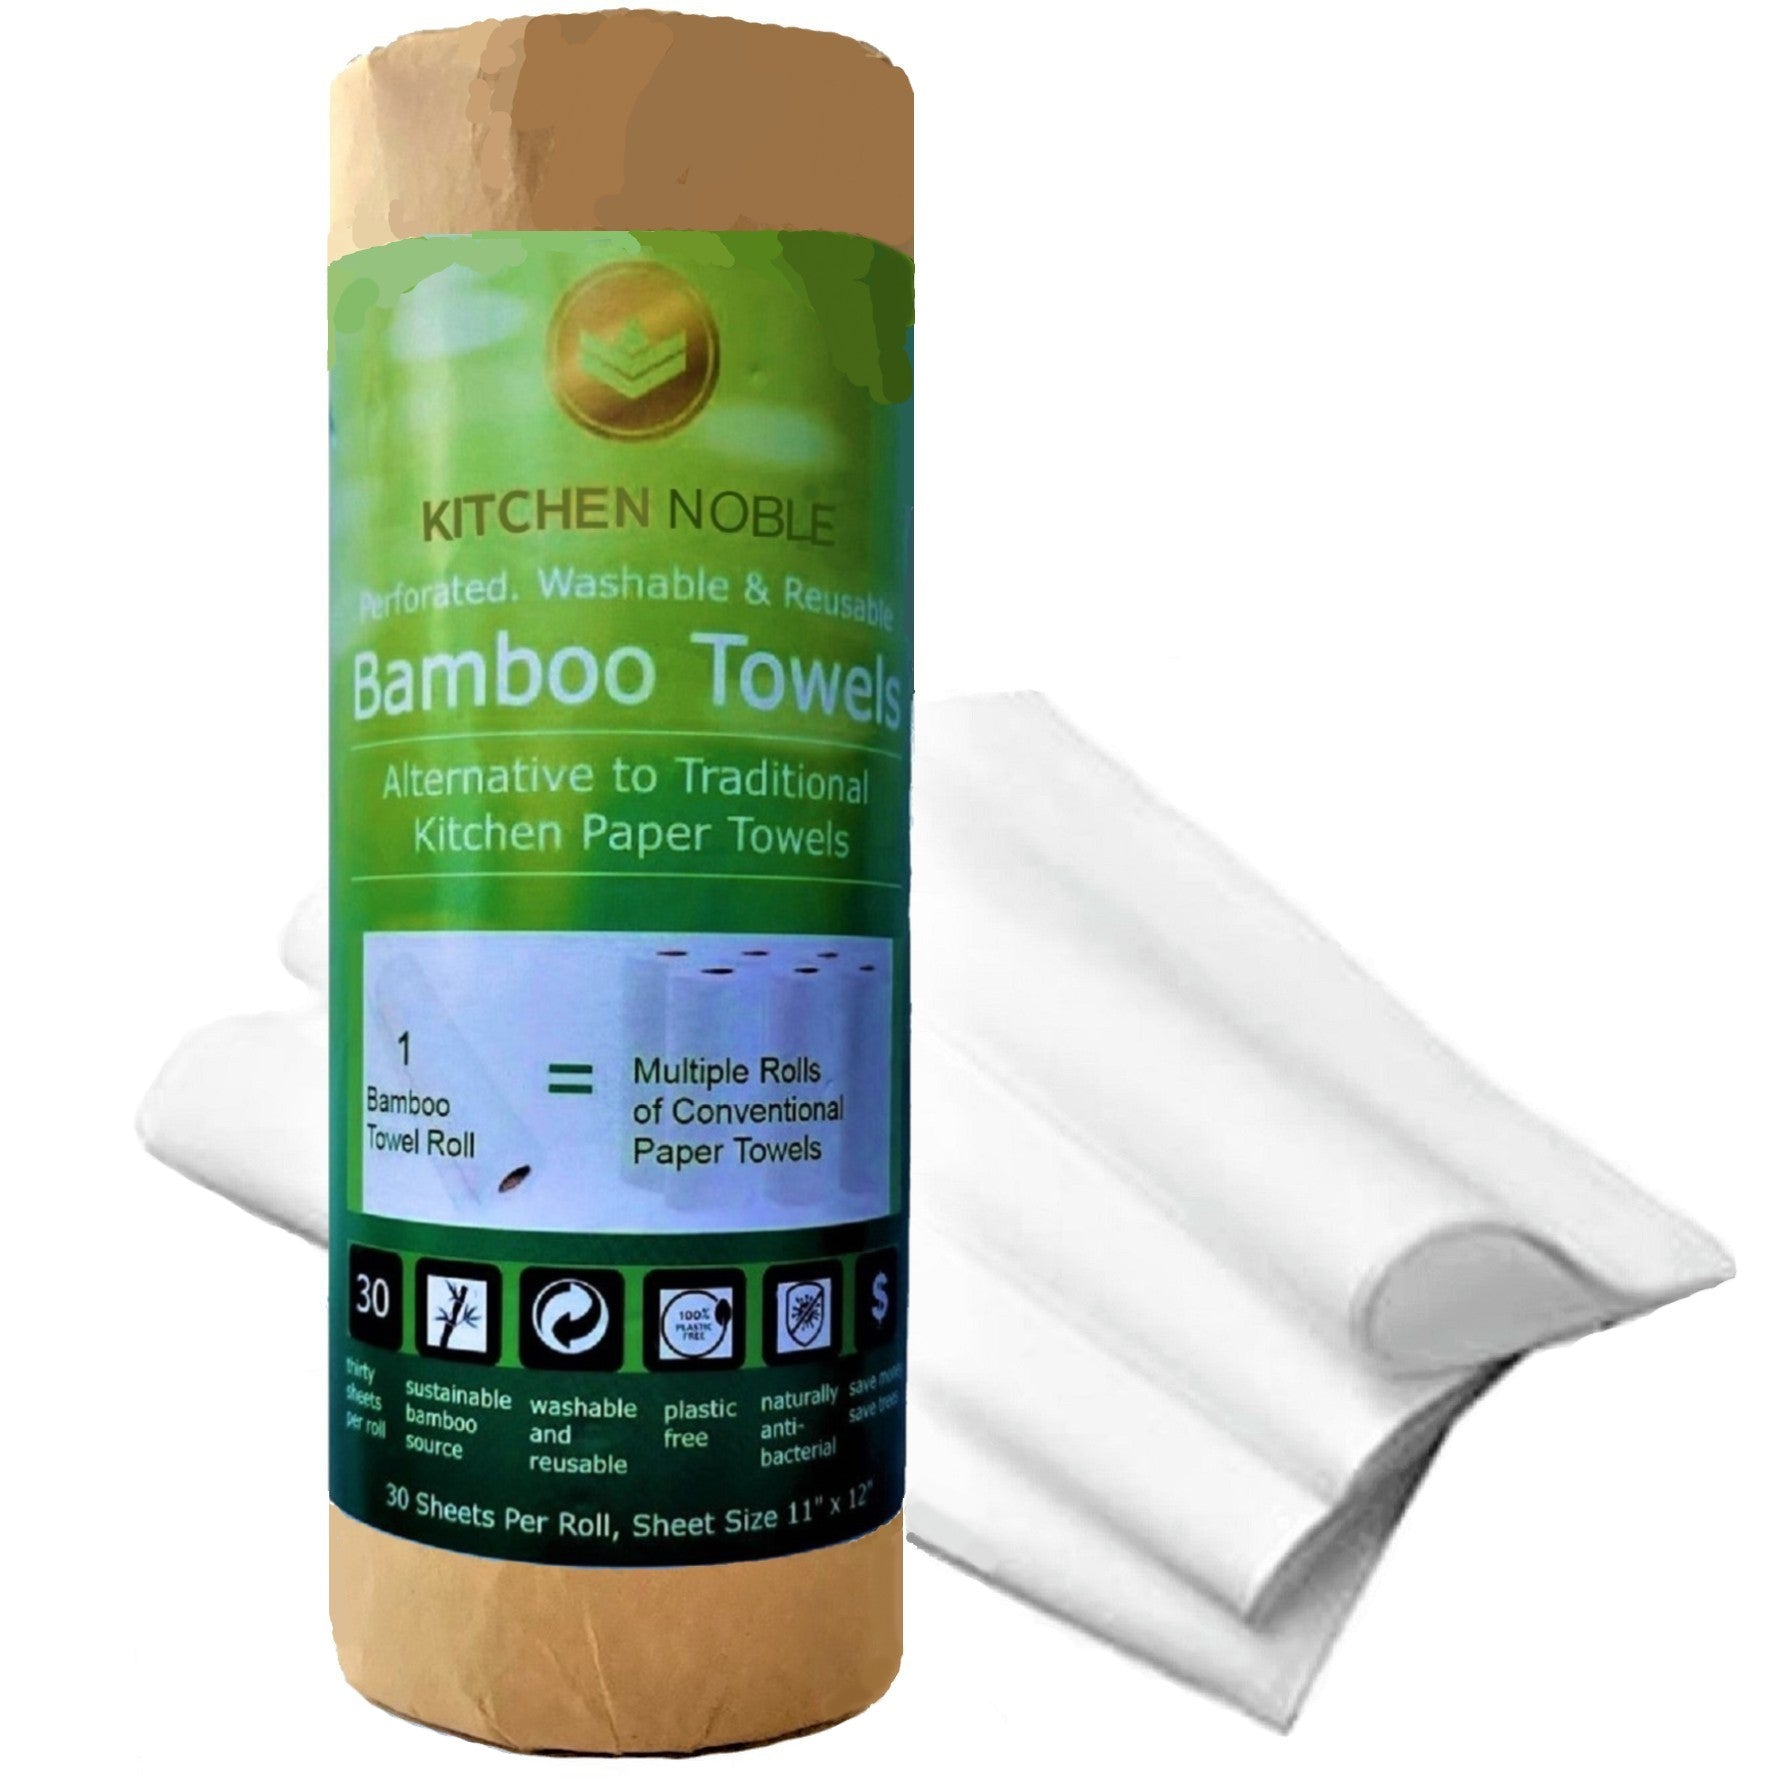 KitchLife Reusable Bamboo Paper Towels - 1 Roll 4 Months Supply